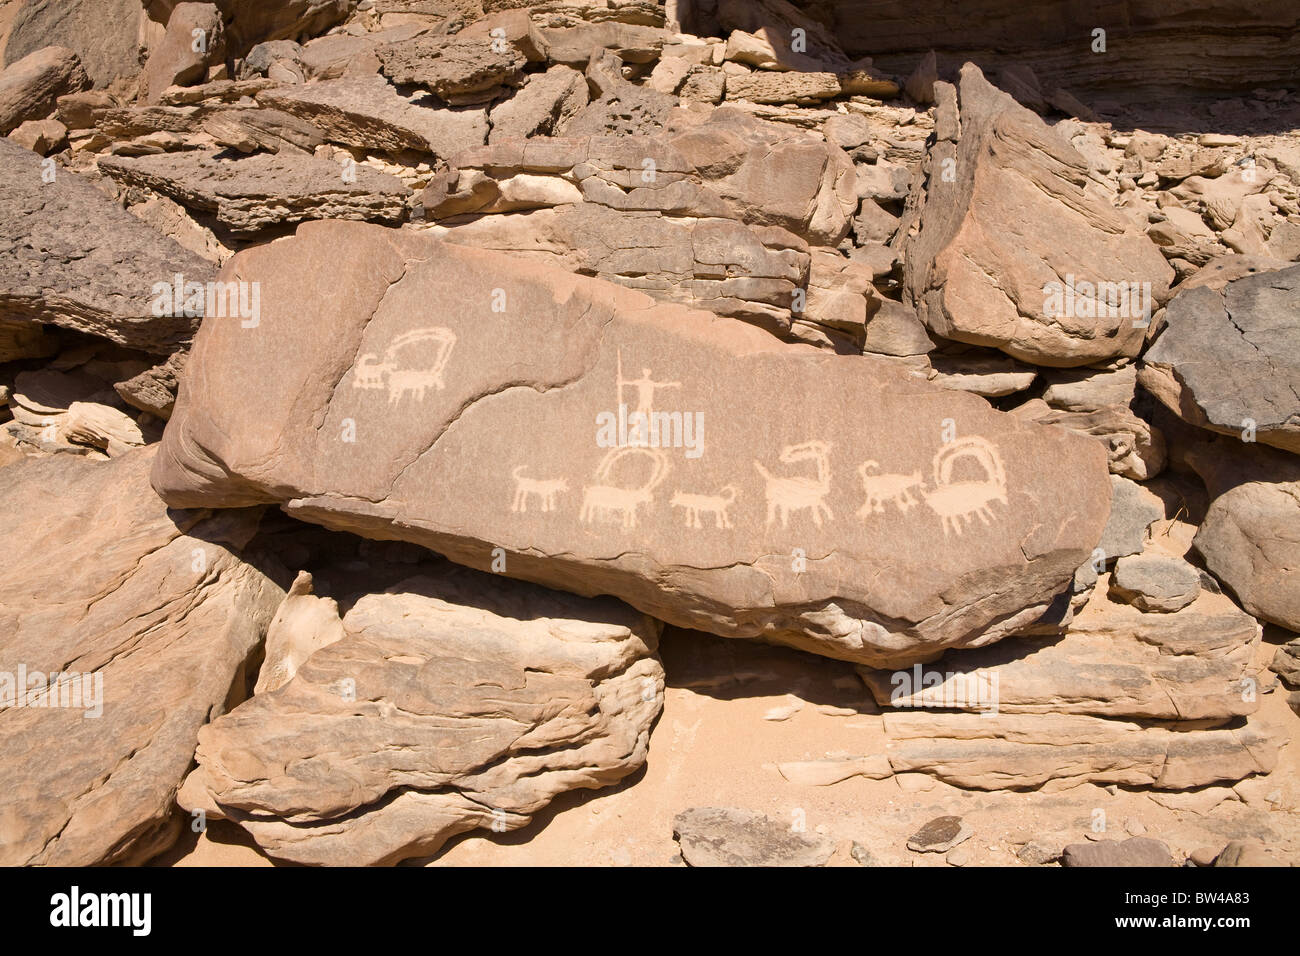 Ancient rock art showing depictions of man hunting  animals in the Eastern Desert of Egypt. Stock Photo